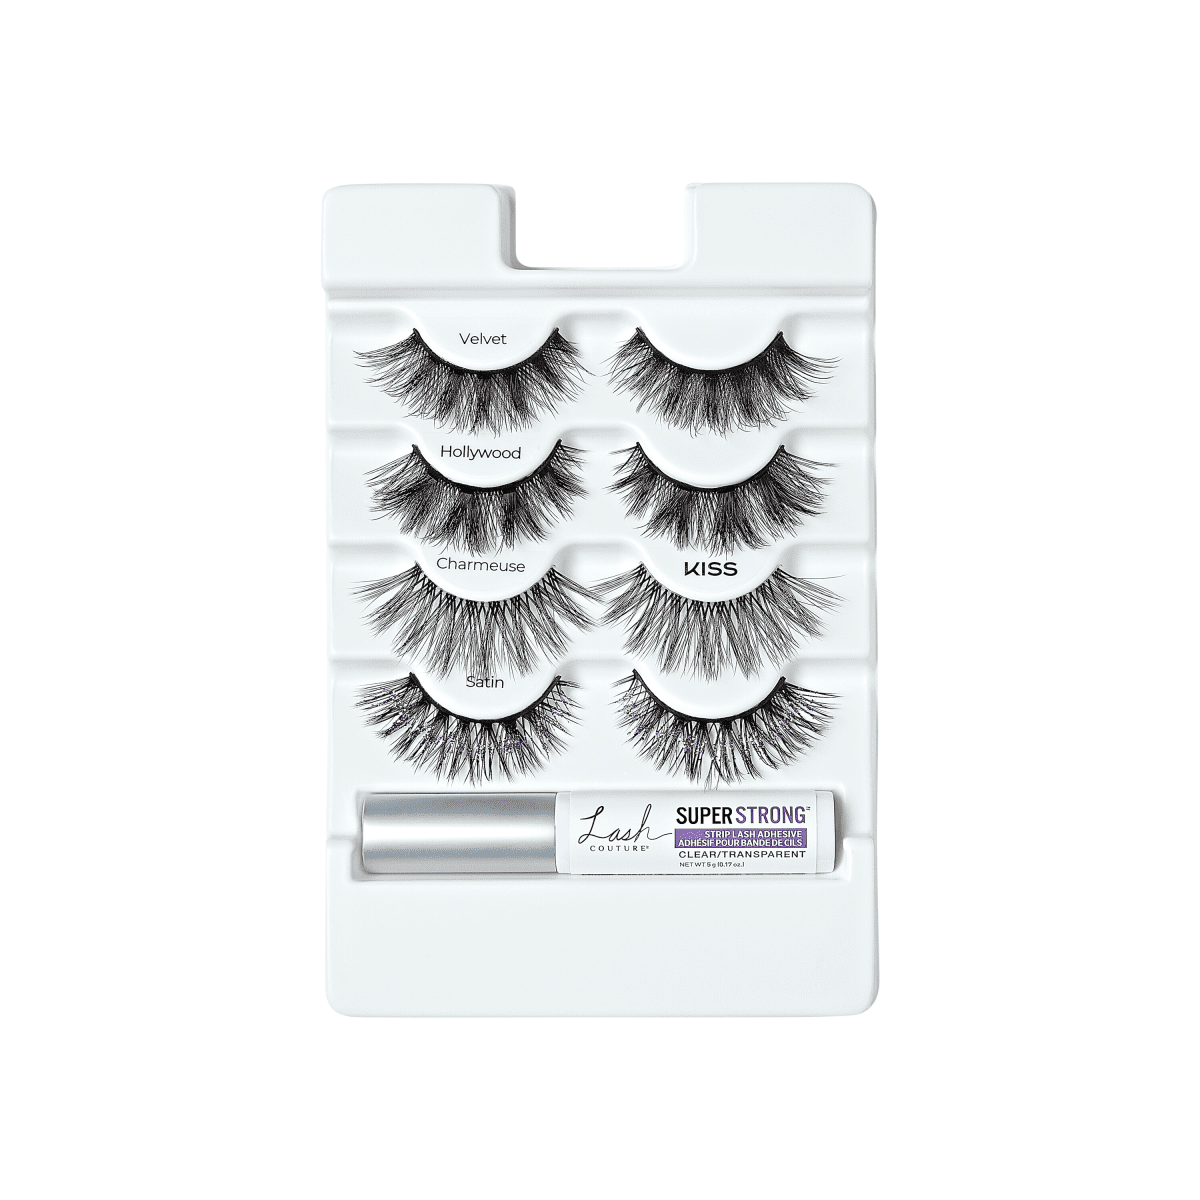 KISS Lash Couture Luxtension, False Eyelashes, Glitter Pink, 14mm-16mm-18mm, 4 Pairs